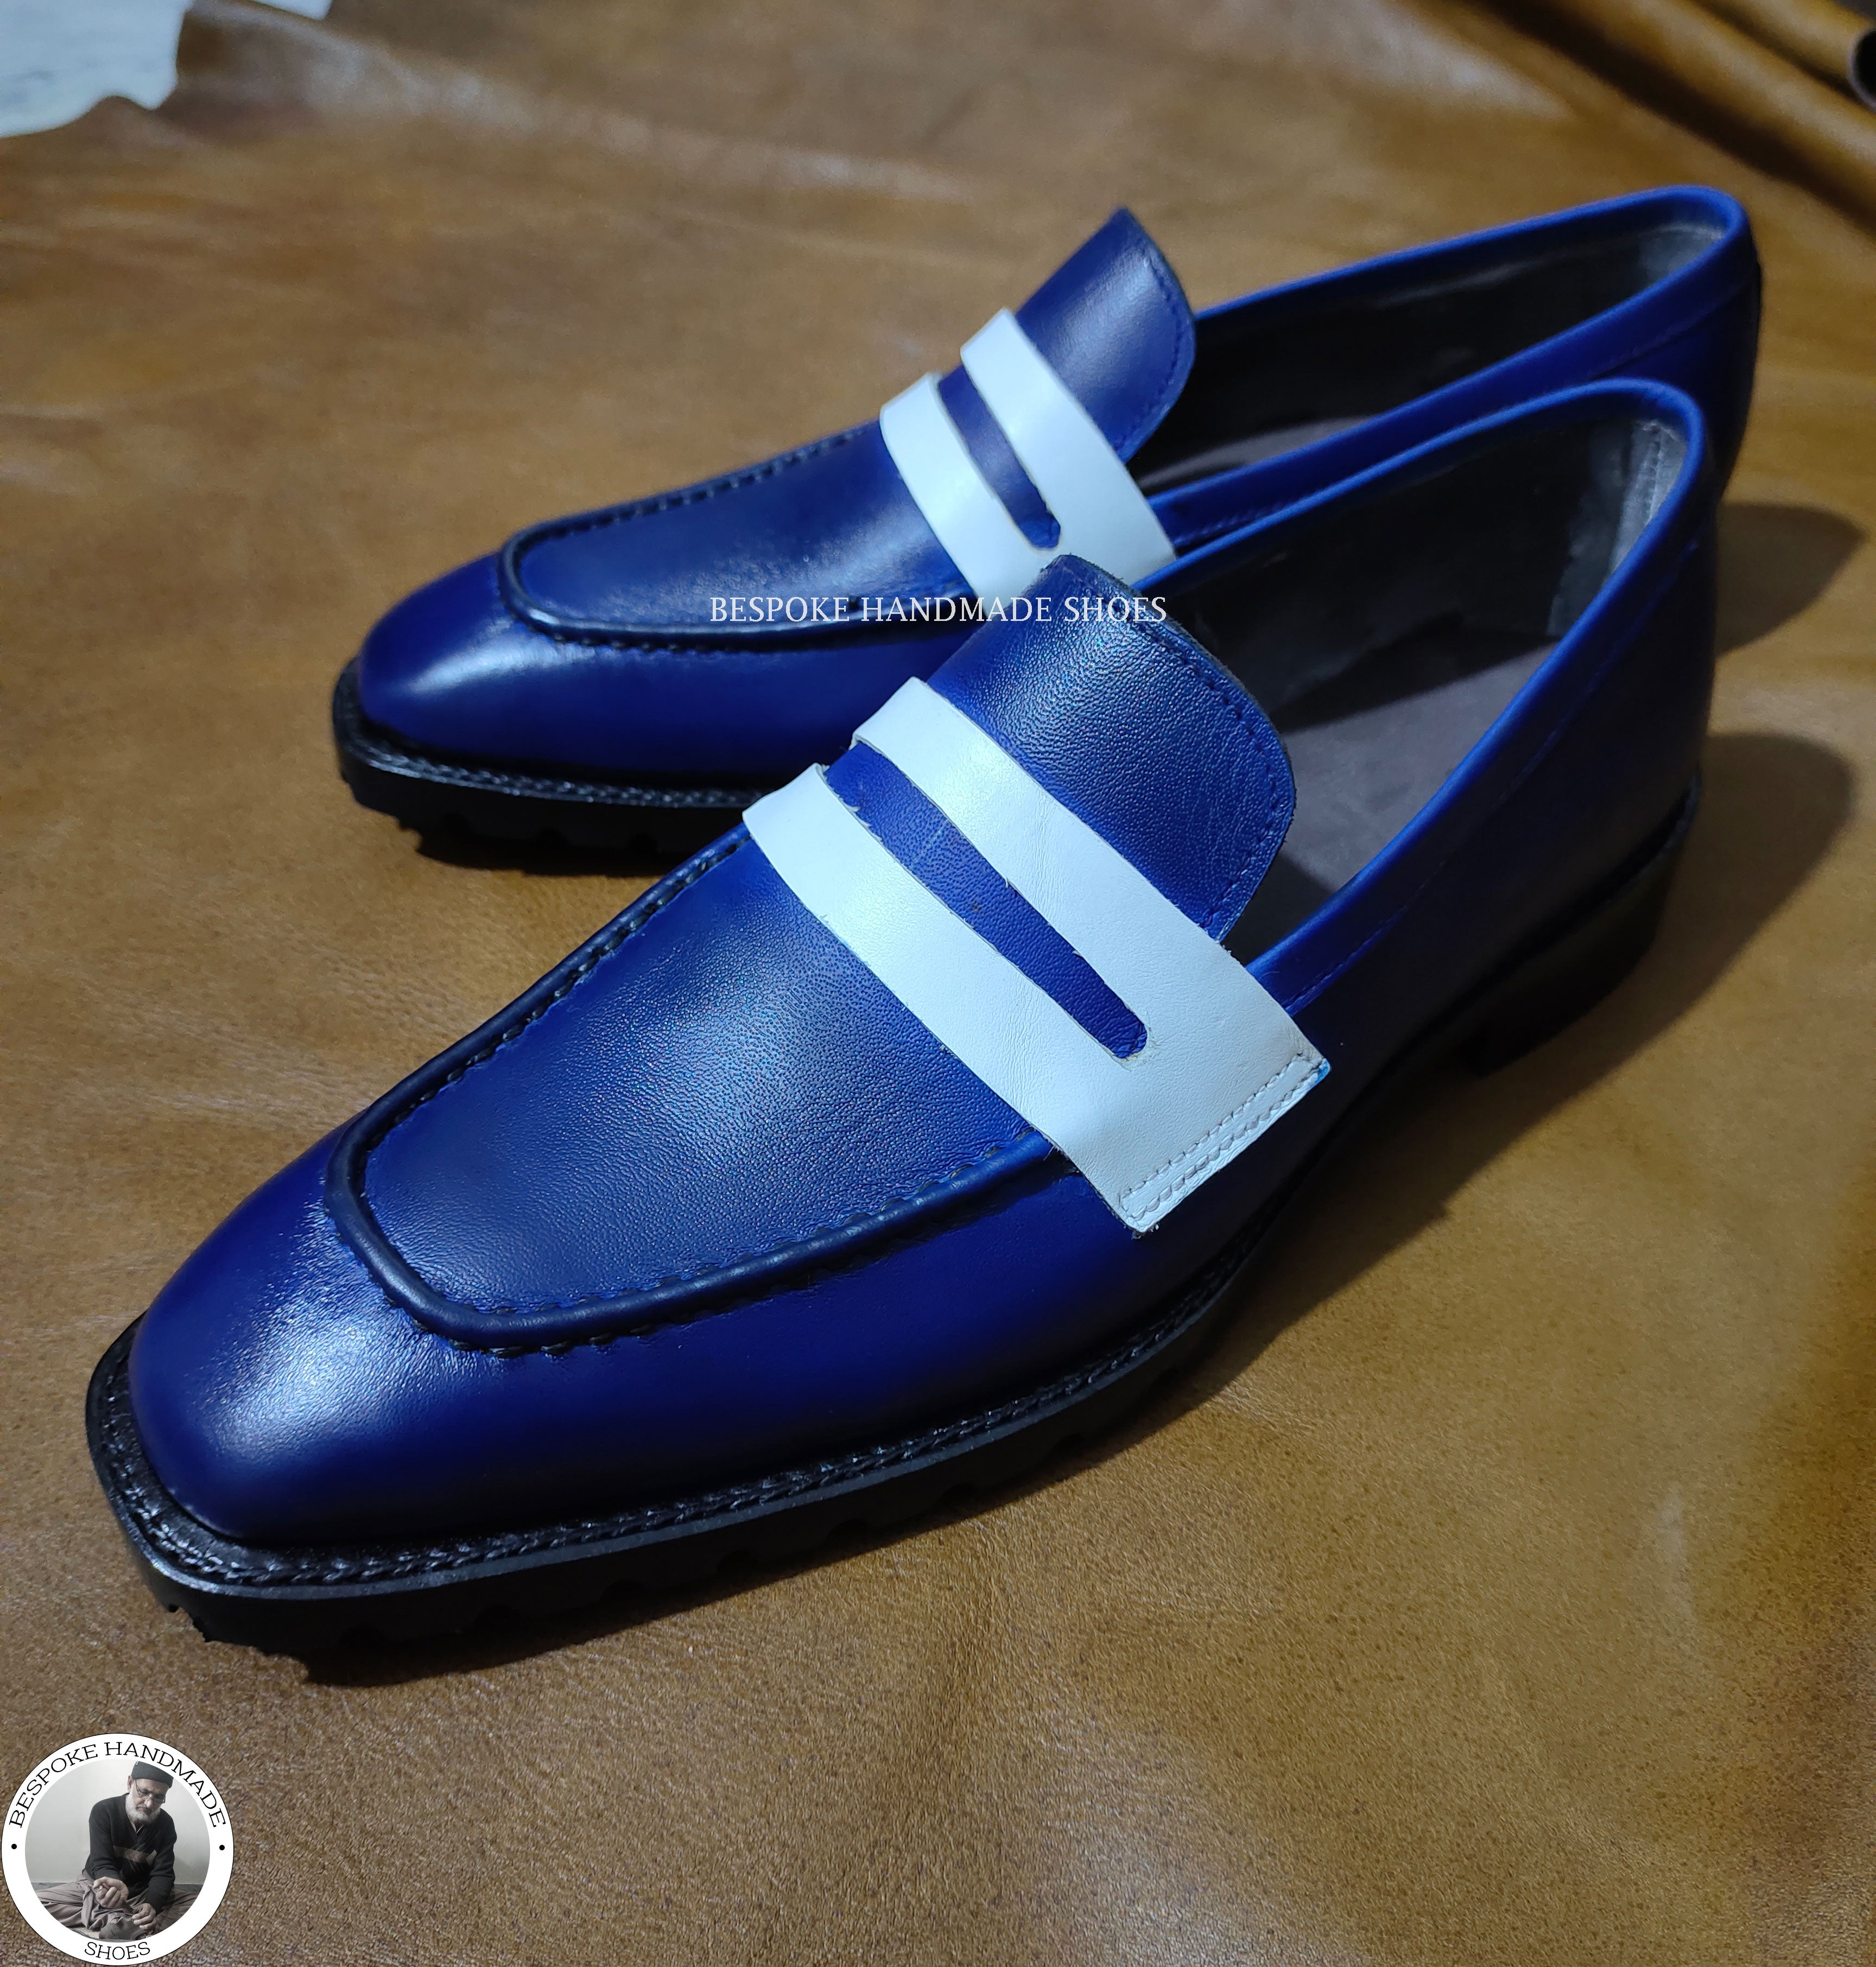 Buy Men’s Genuine Blue & White Leather Genuine Slip on Loafer Style Dress / Casual Shoes